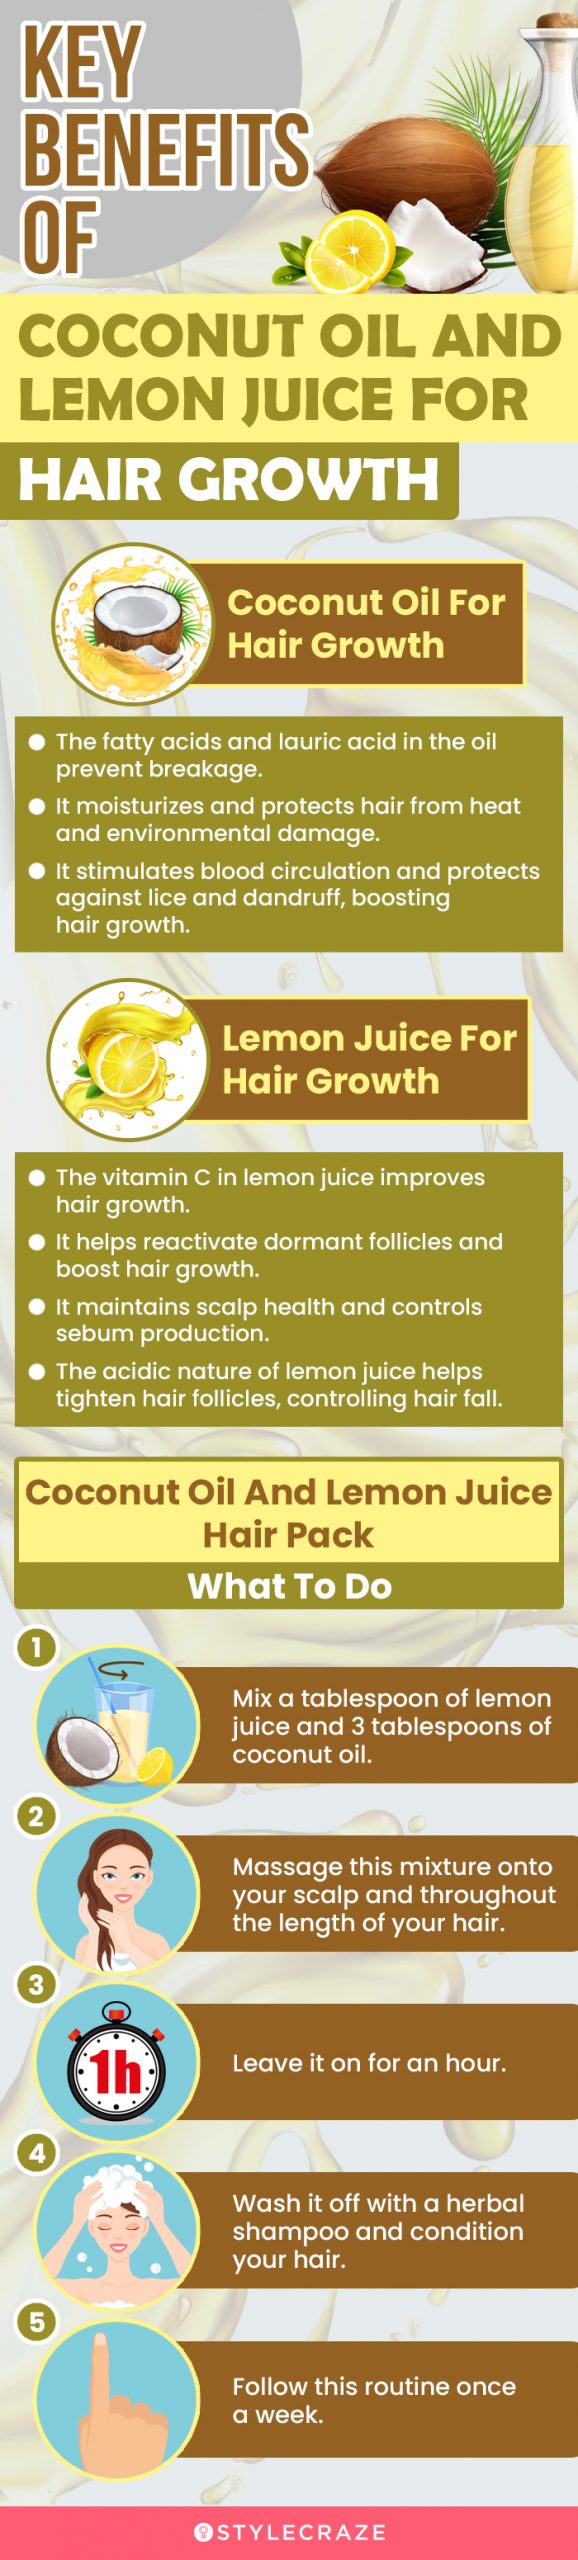 Coconut Oil And Lemon Juice For Hair Growth And Conditioning